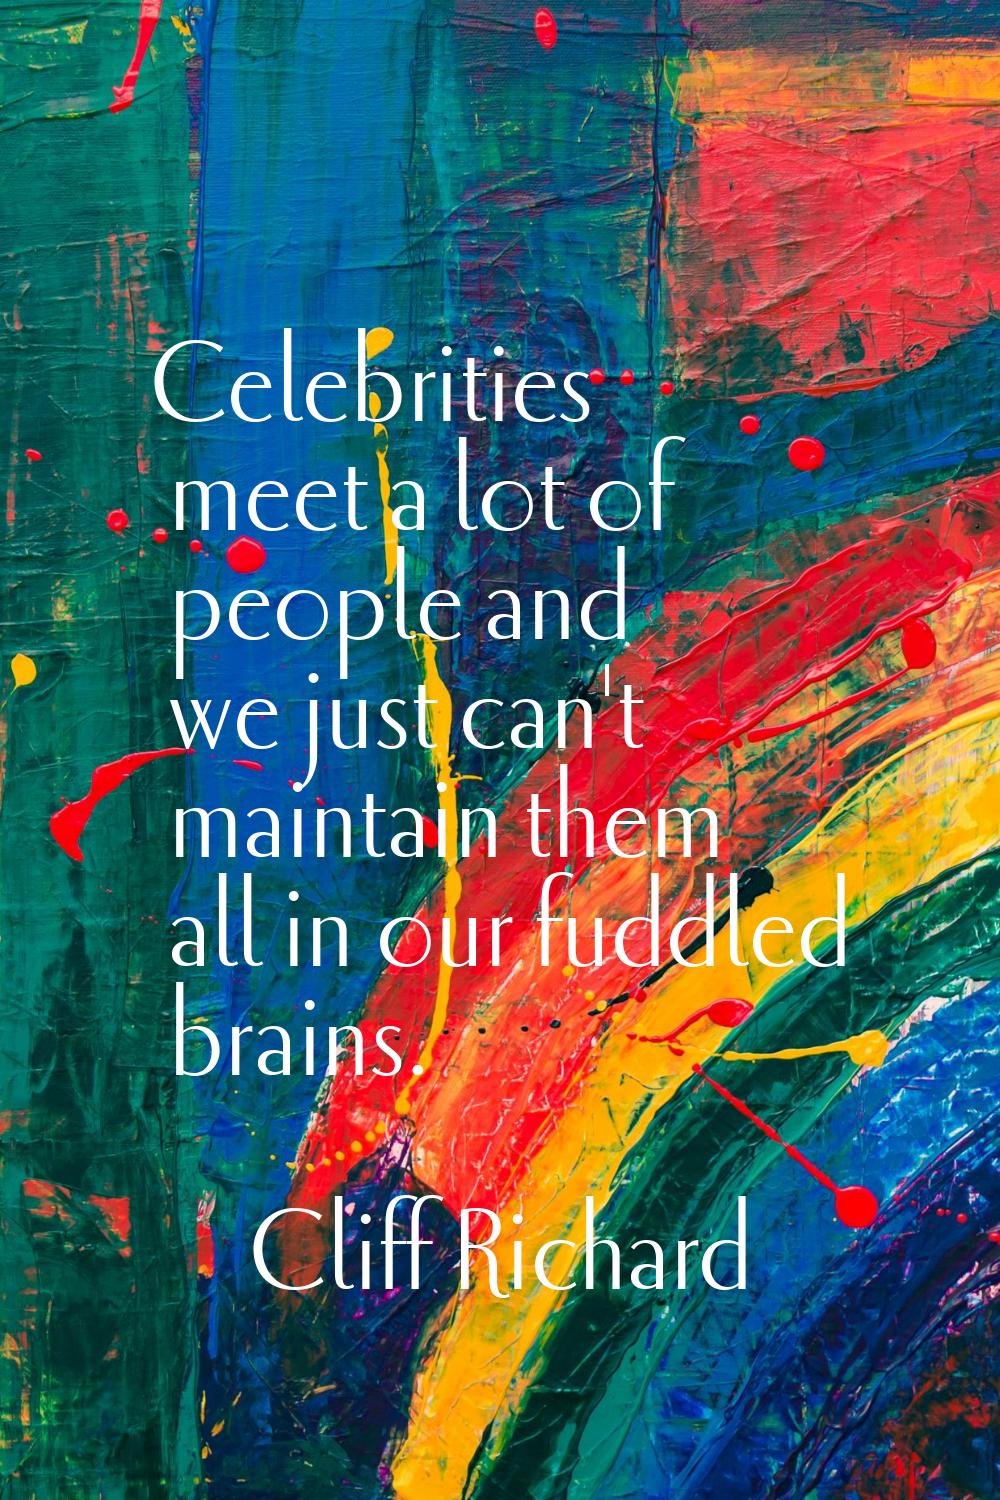 Celebrities meet a lot of people and we just can't maintain them all in our fuddled brains.